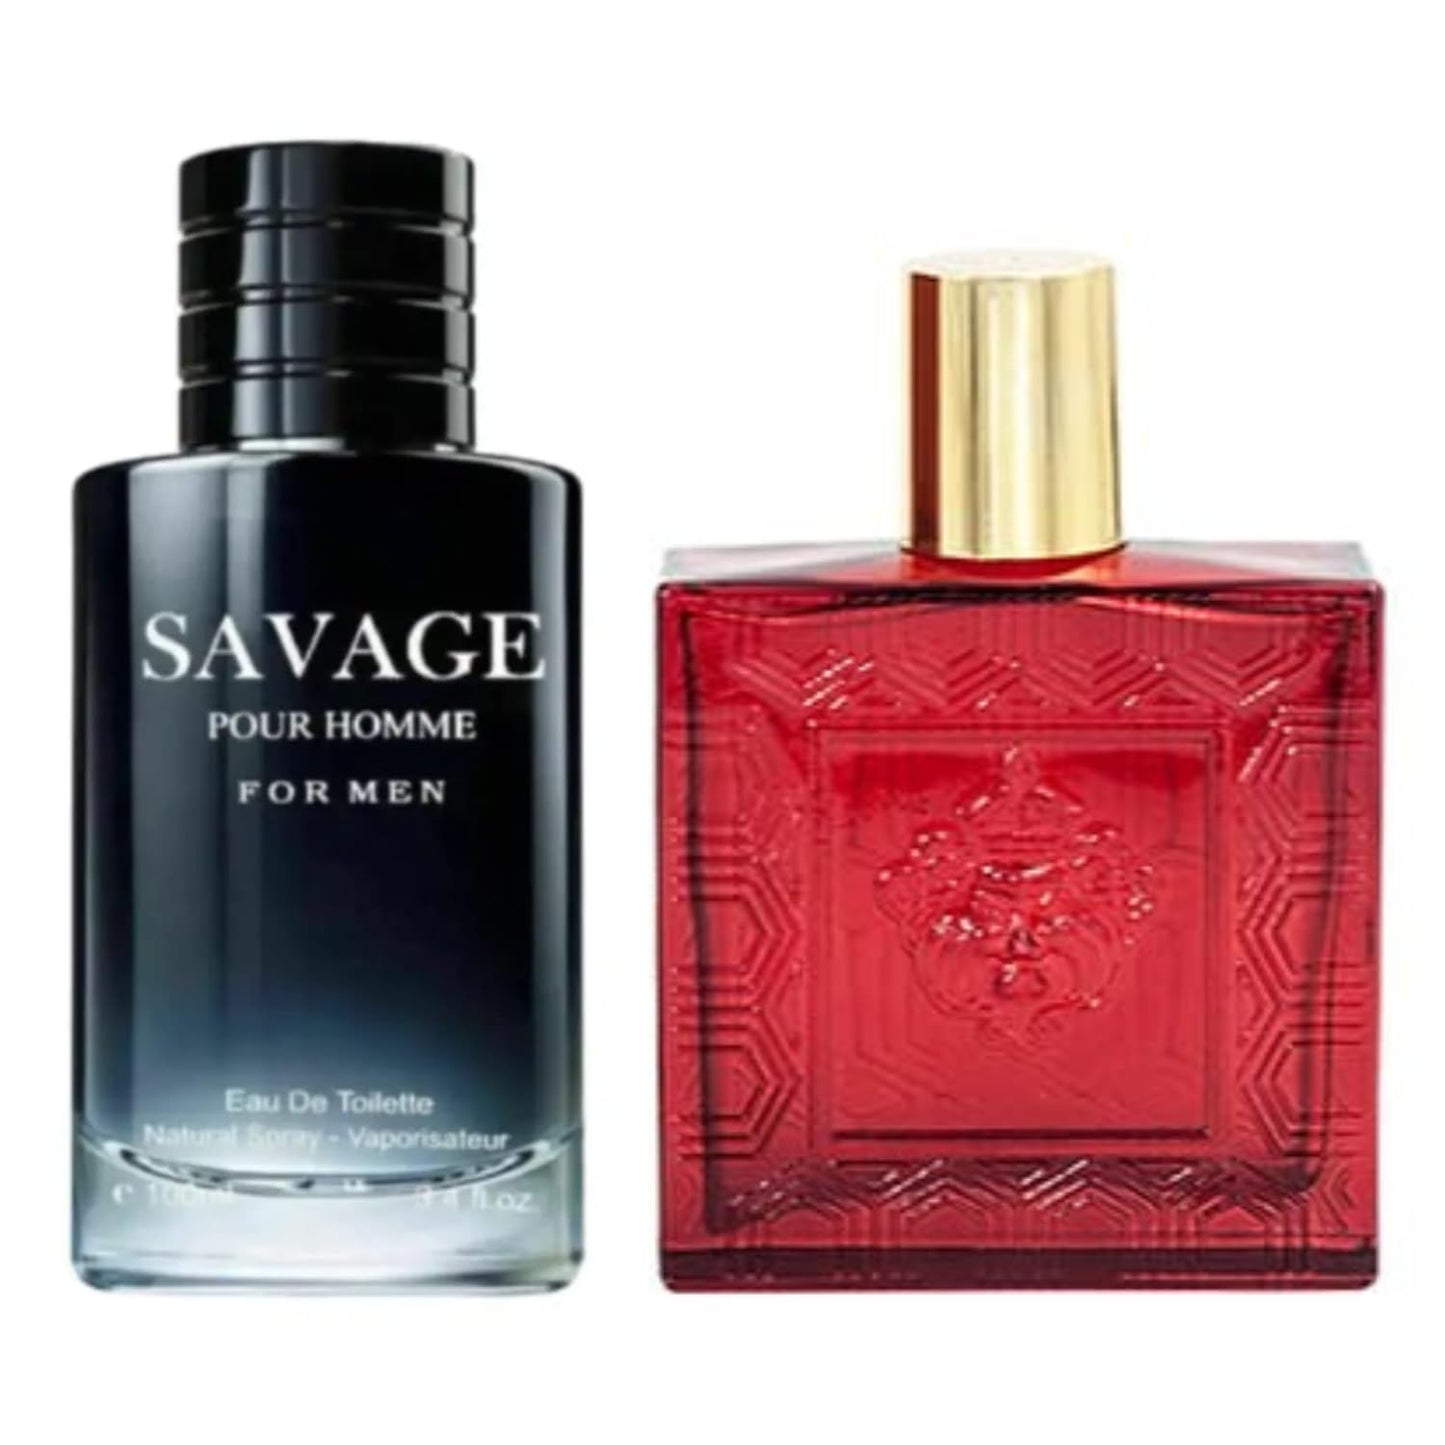 Savage Pour Home & Lion Versatile Red Flame Cologne for Men, Eau De Toilette Natural Spray, (Inspired by Sauvage & Versase Red Flame) 3.4oz Fl Oz/100ml each